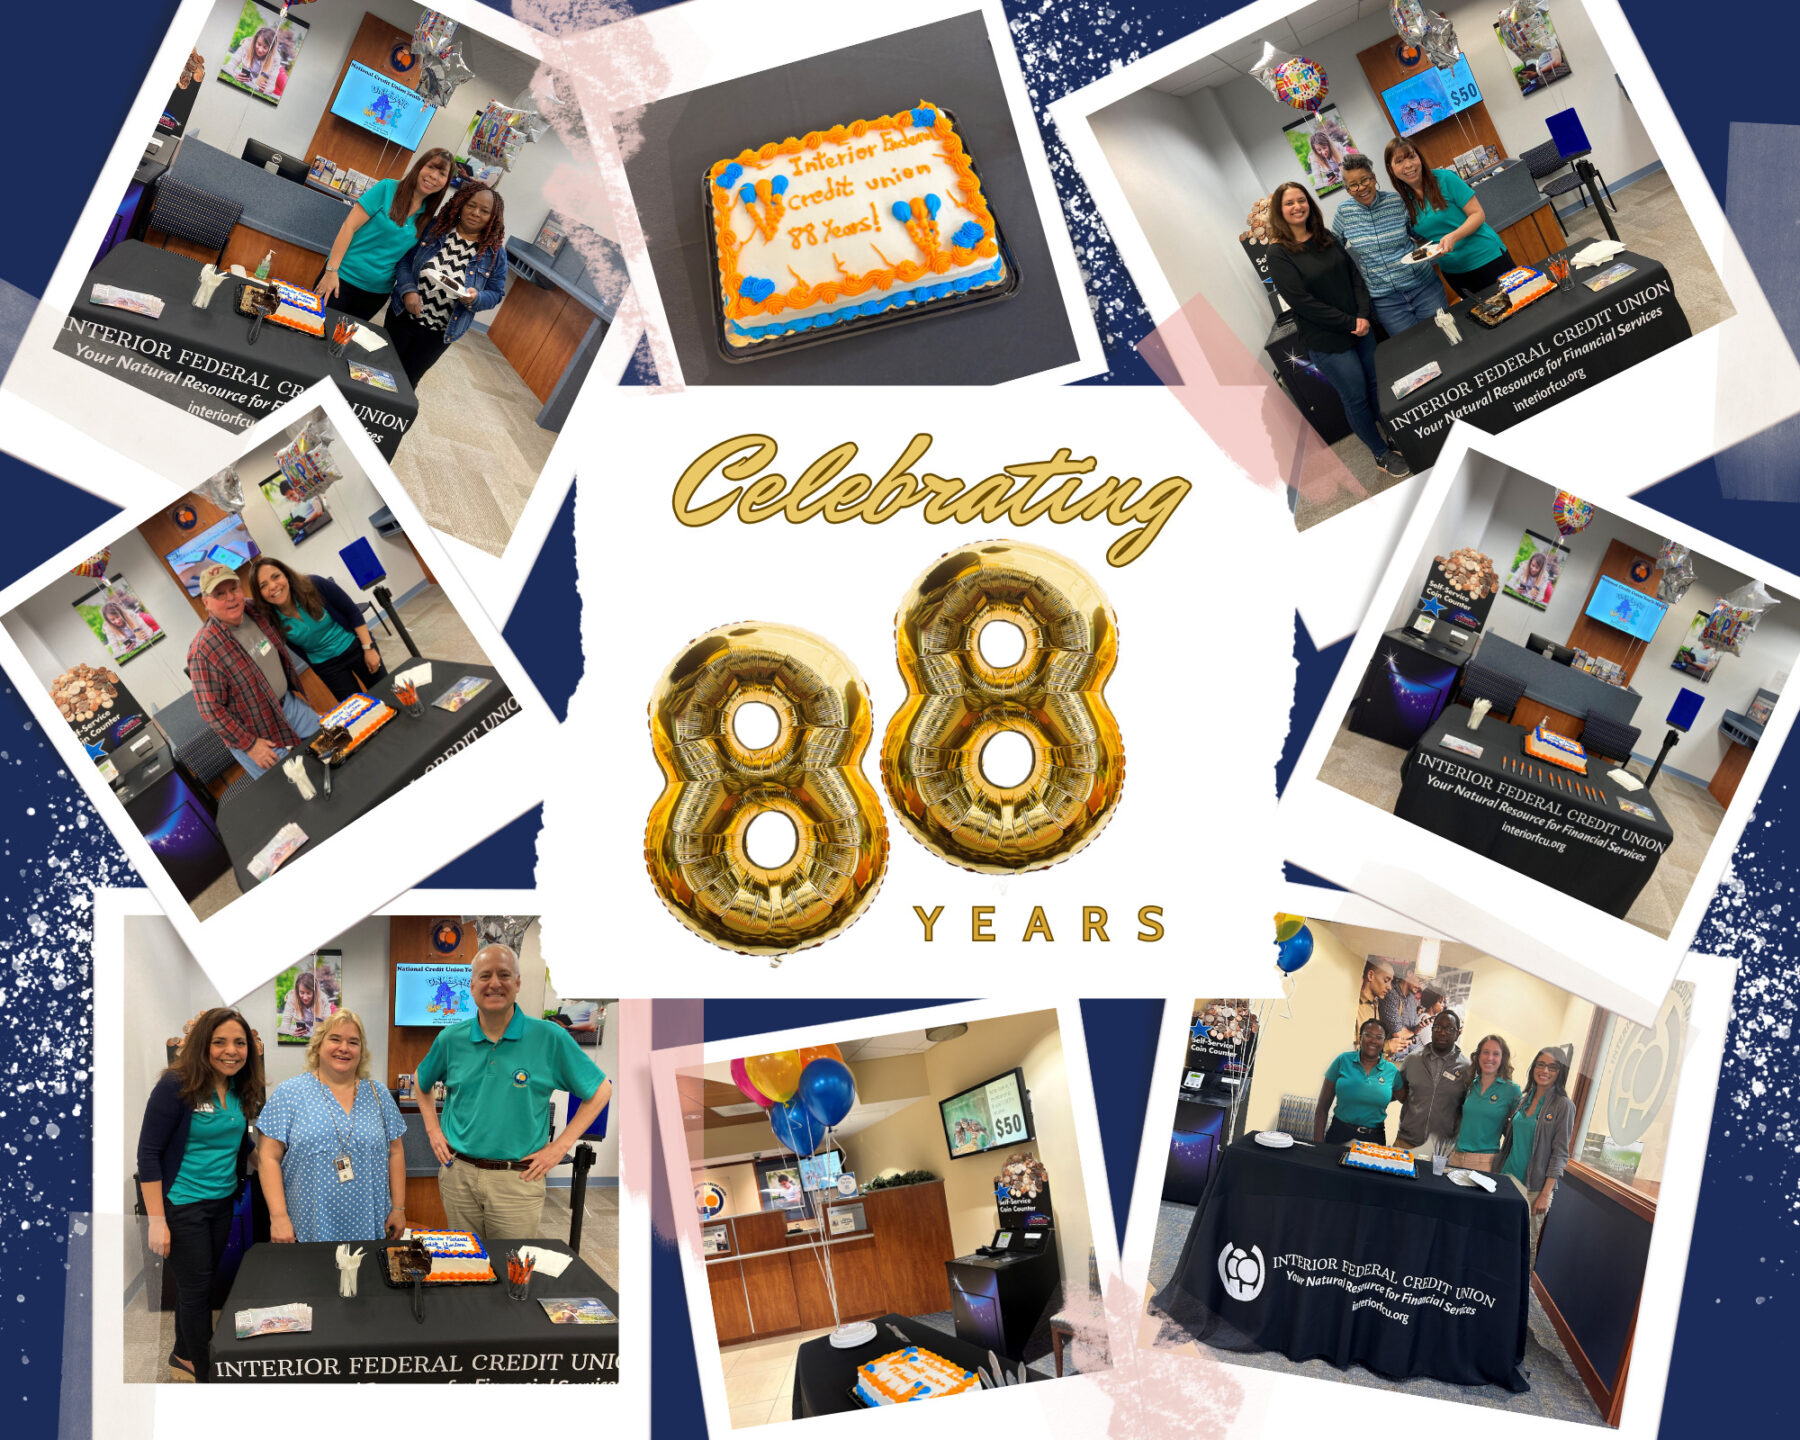 staff and members celebrating the credit union's 88th anniversary